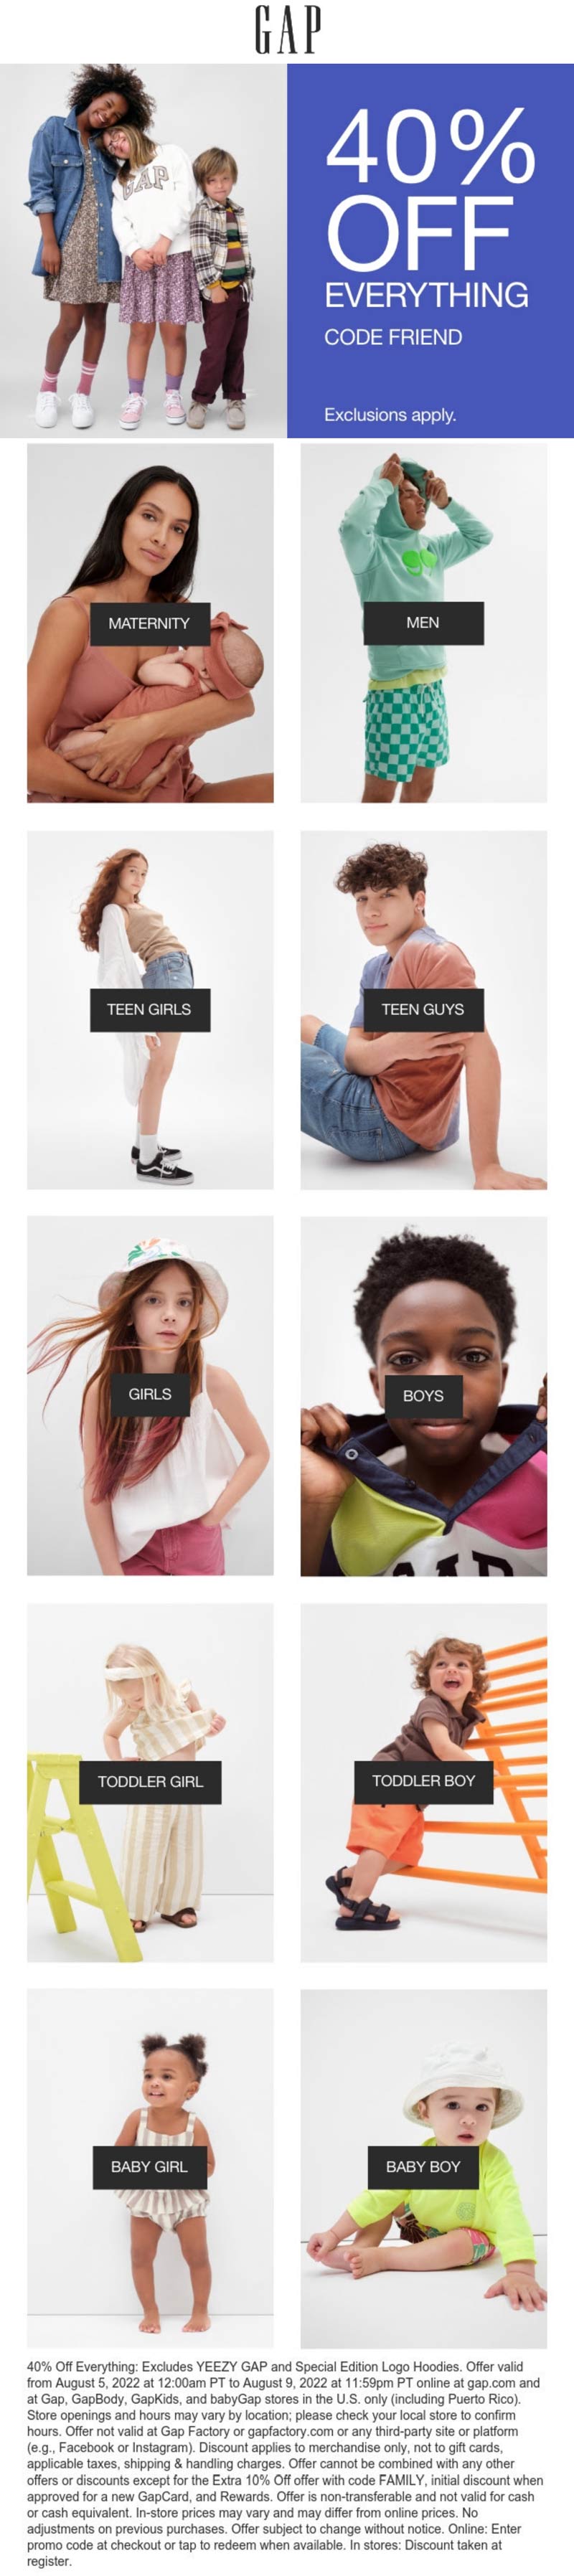 Gap coupons & promo code for [December 2022]